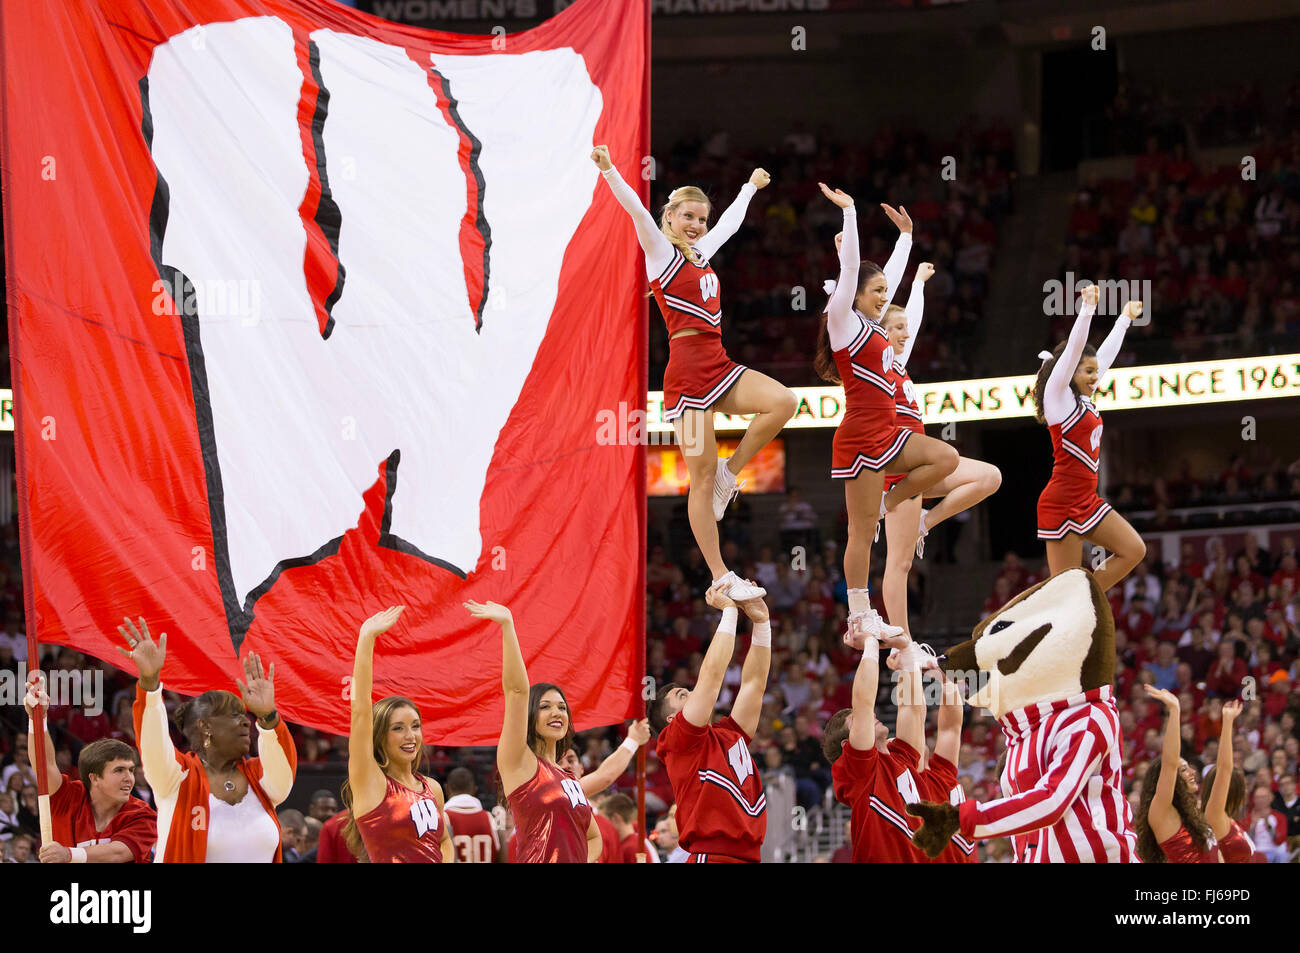 Madison, WI, USA. 28th Feb, 2016. Wisconsin cheerleaders during the NCAA Basketball game between the Michigan Wolverines and the Wisconsin Badgers at the Kohl Center in Madison, WI. Wisconsin defeated Michigan 68-57. John Fisher/CSM/Alamy Live News Stock Photo